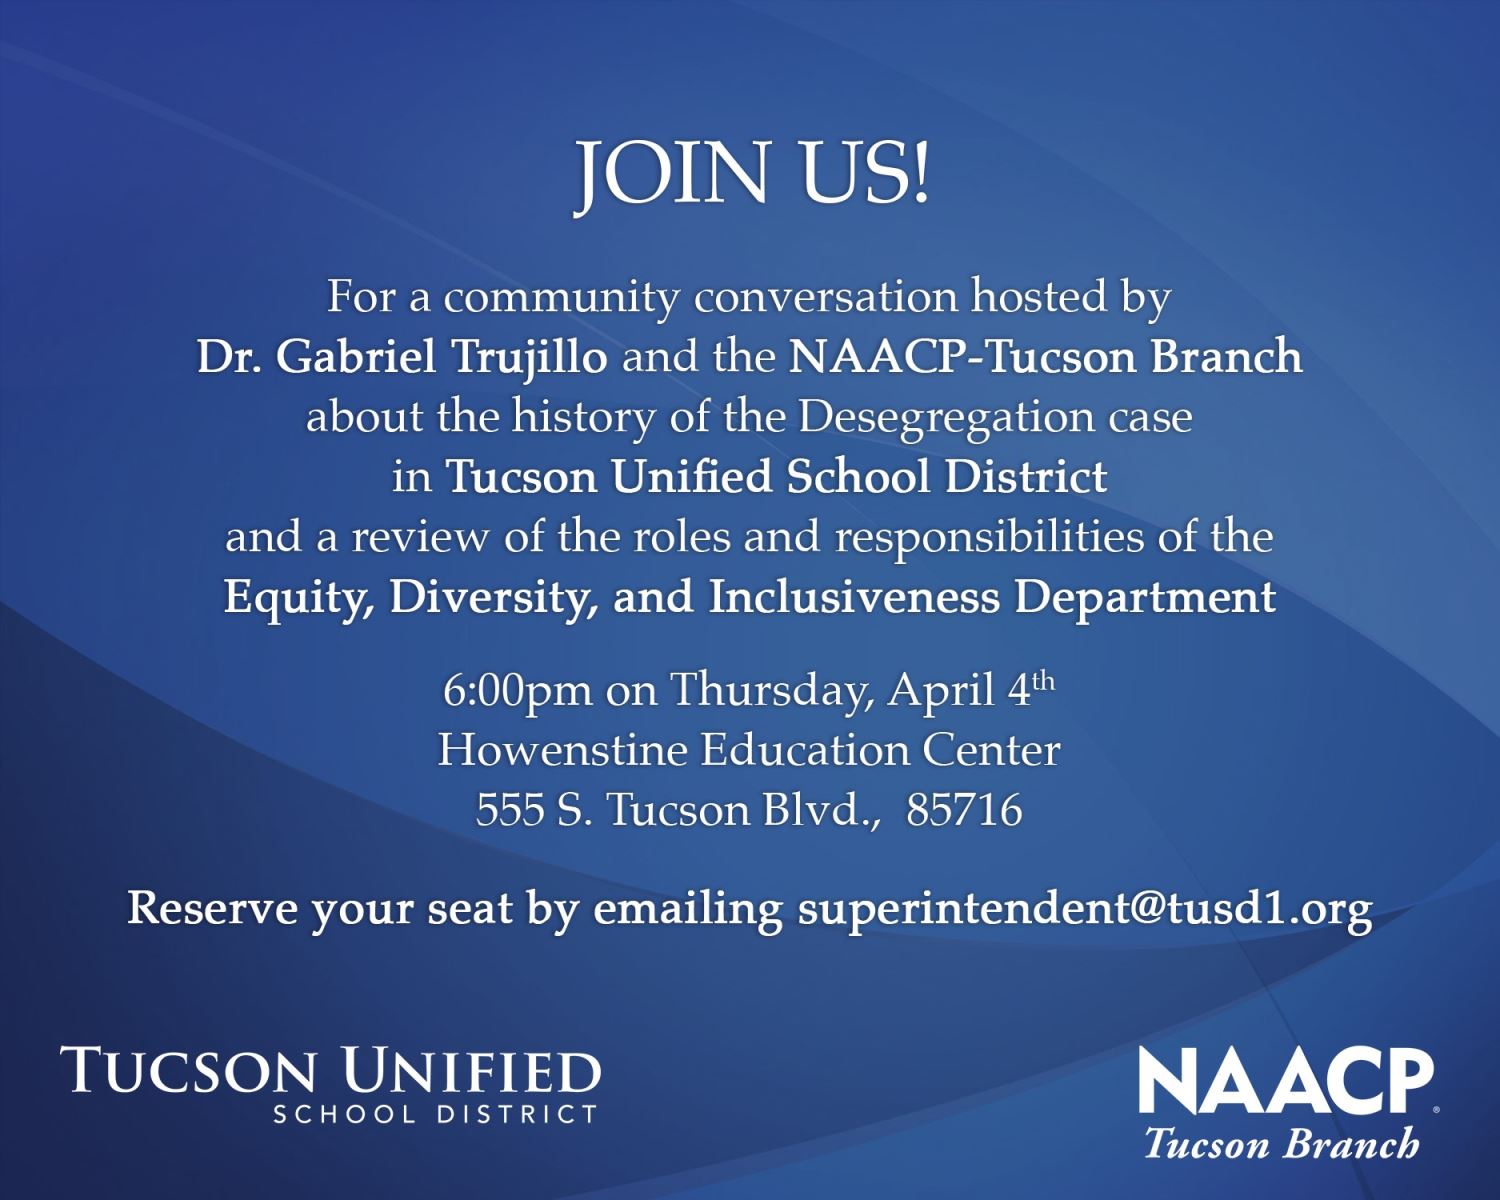 Join us for a community conversation hosted by Dr. Gabriel Trujillo and the NAACP-Tucson Branch about the history of the Desegregation case in Ųʰ and a review of the roles and responsibilities of the Equity, Diversity and Inclusiveness Department. Thursday, April 4 | 6 pm | Howenstine Education Center | 555 S. Tucson Blvd., 85716  Reserve your seat by email.